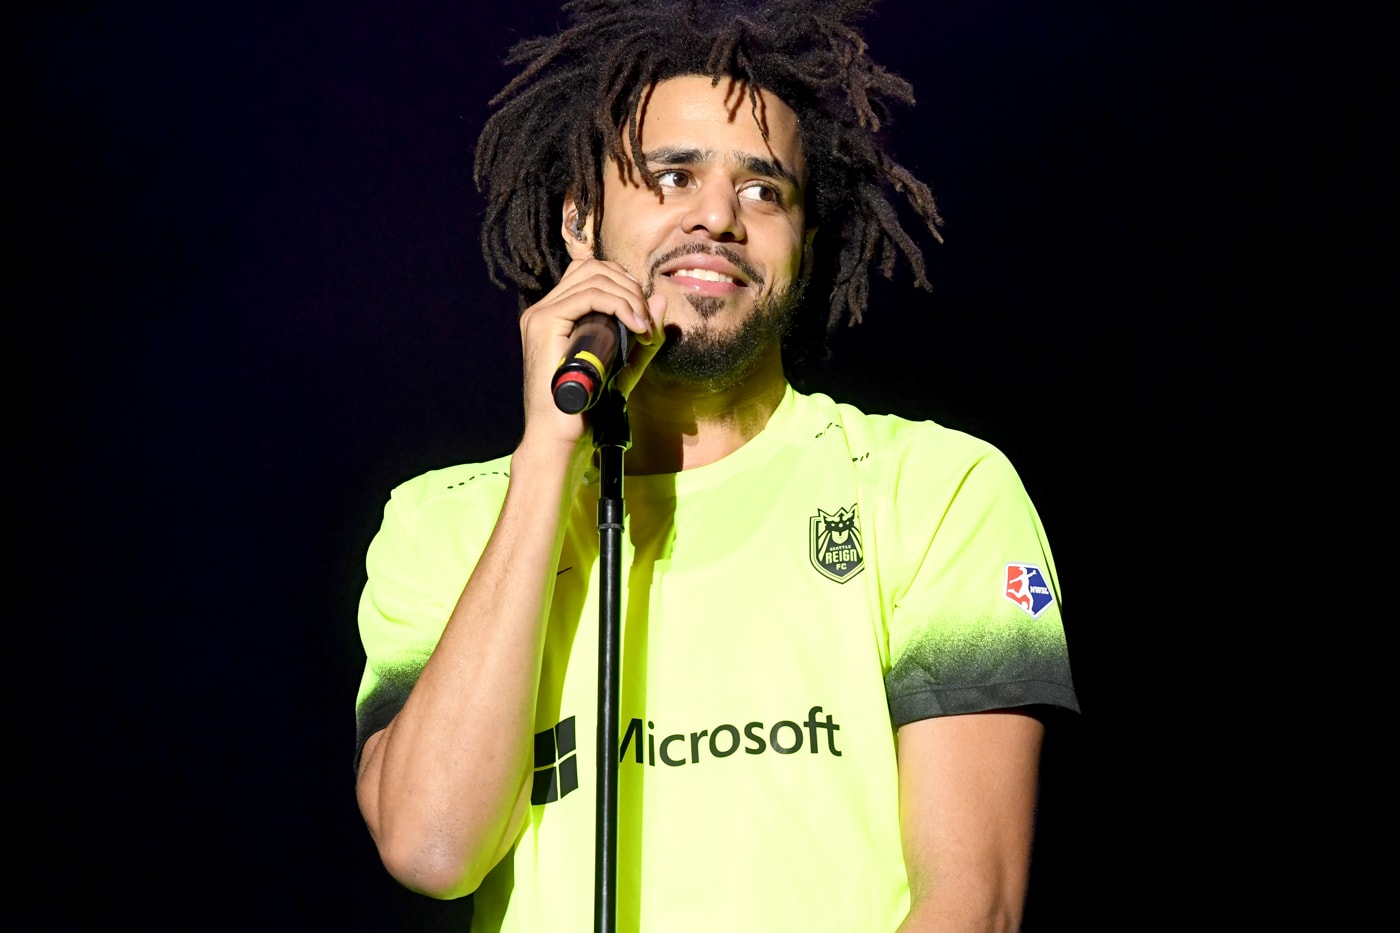 creed-director-accidentally-reveals-j-cole-is-married